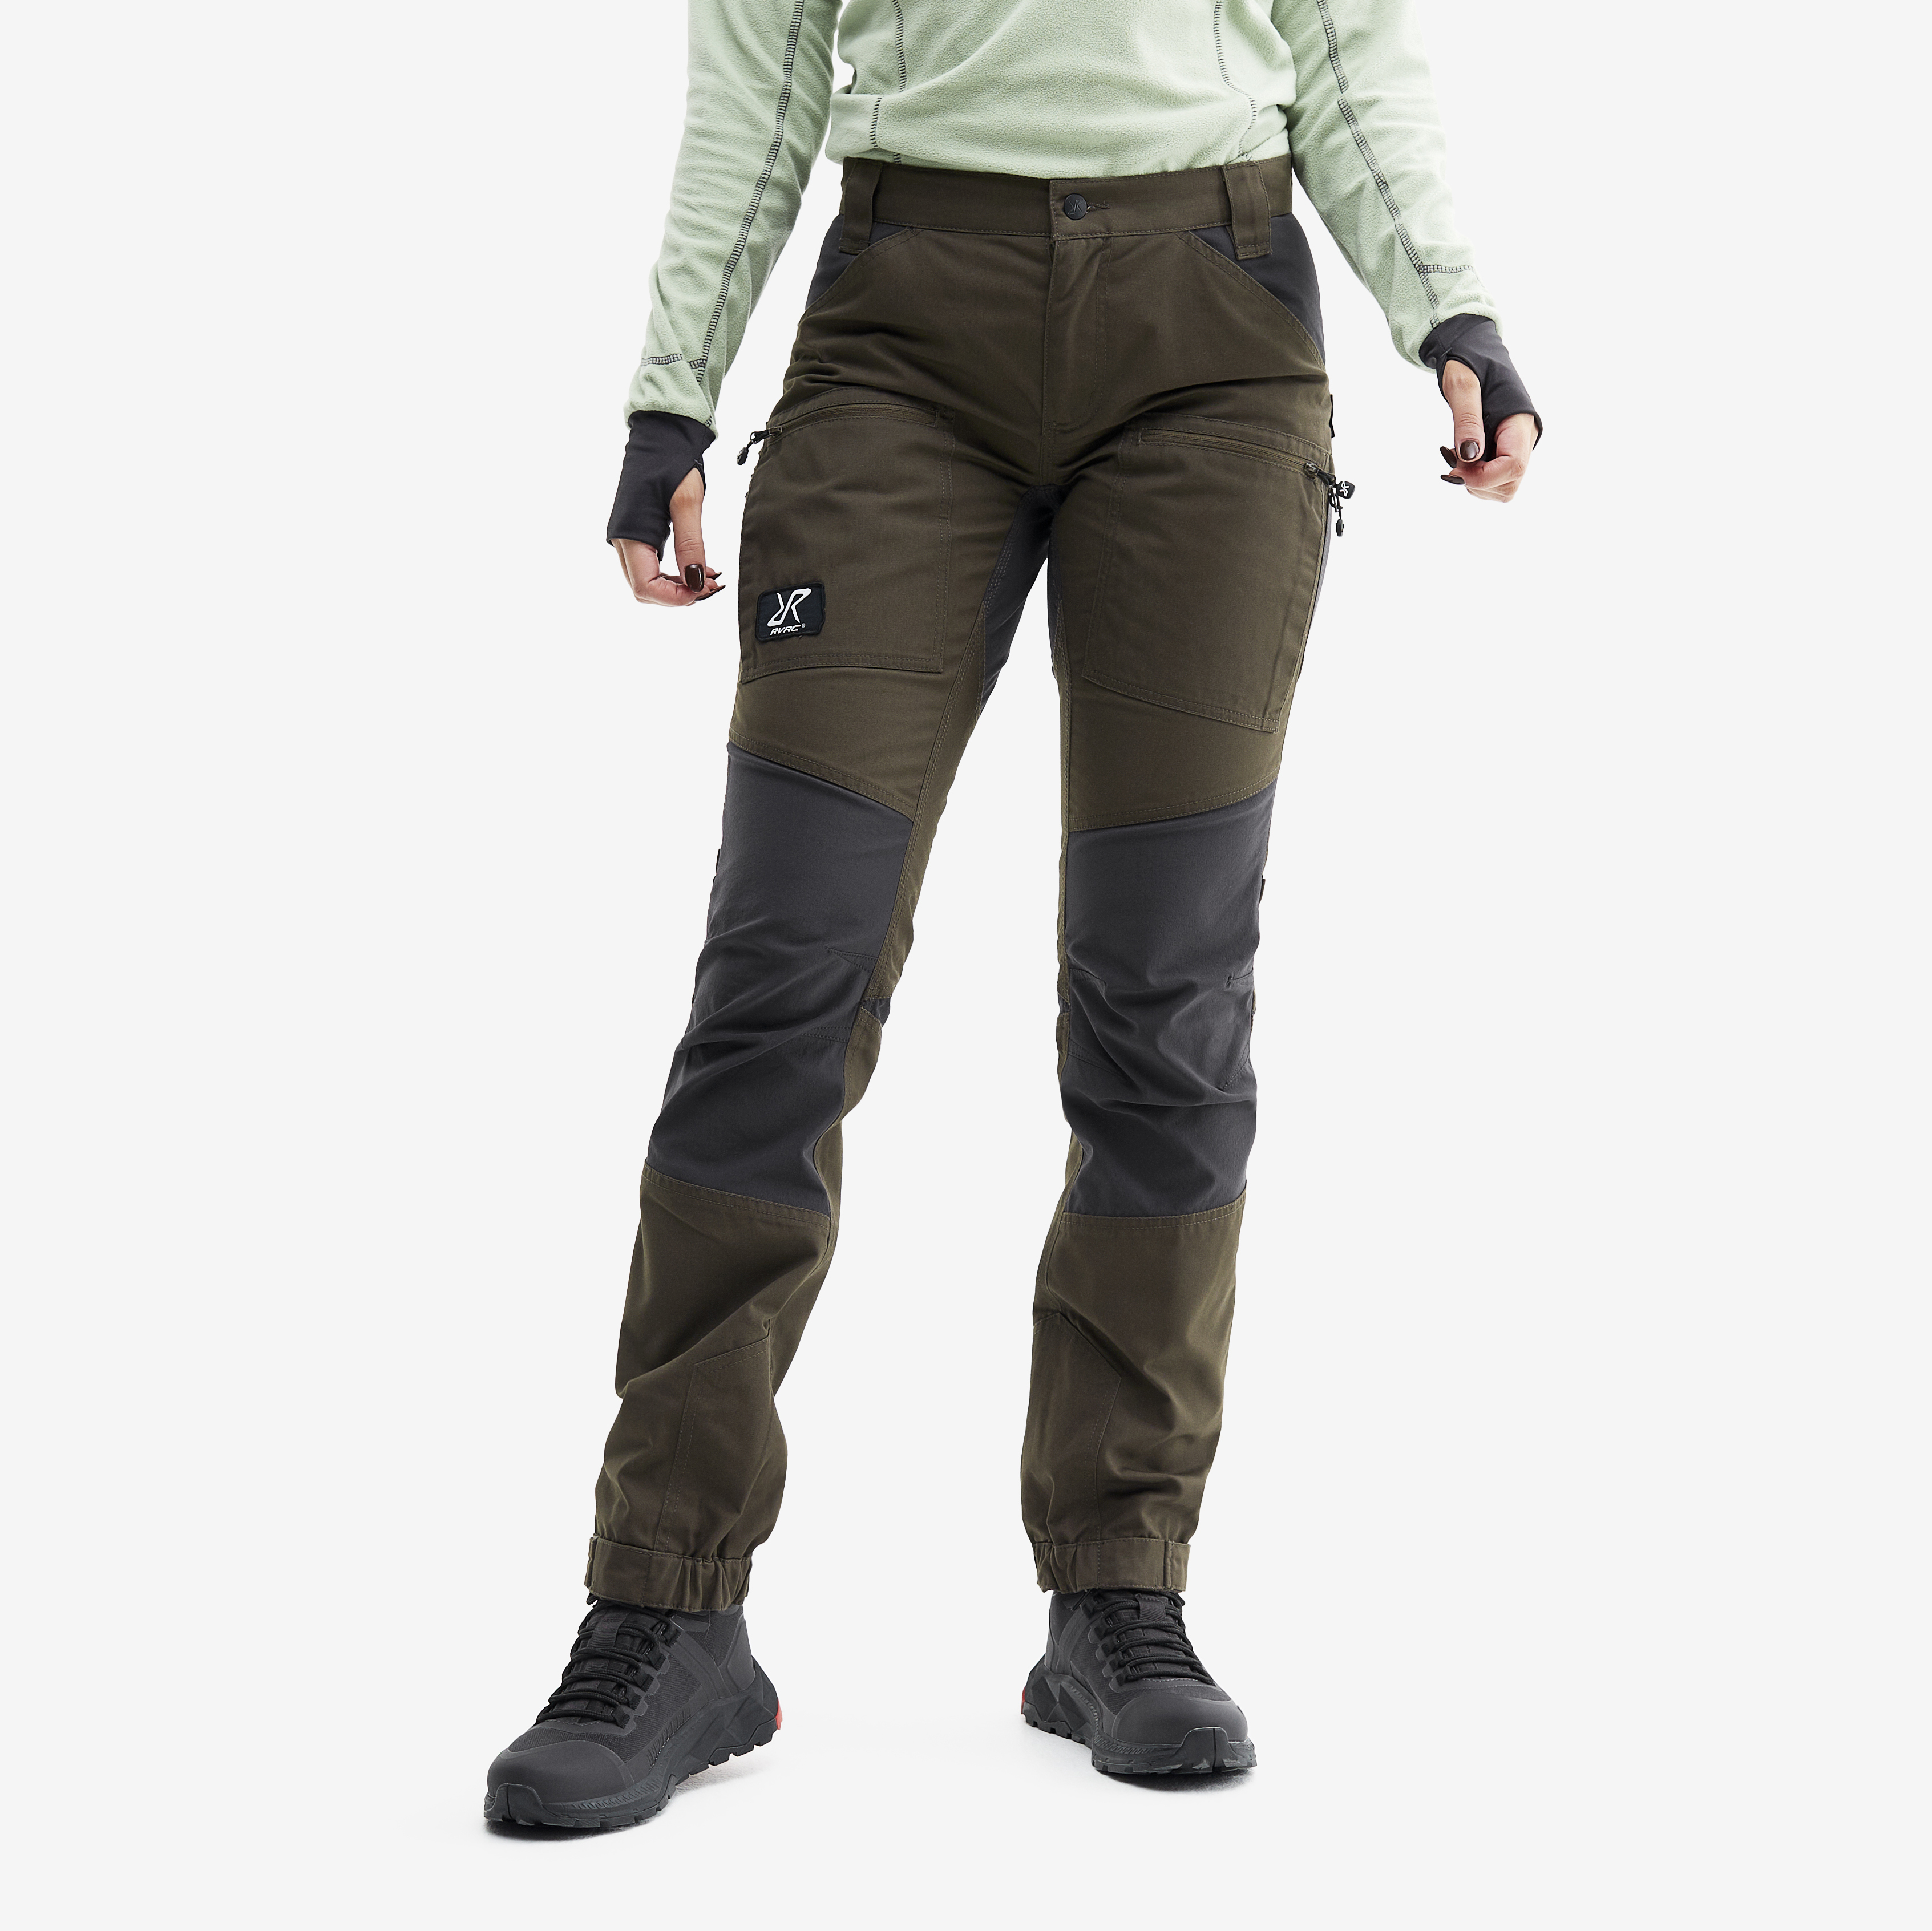 Nordwand Pro hiking trousers for women in brown